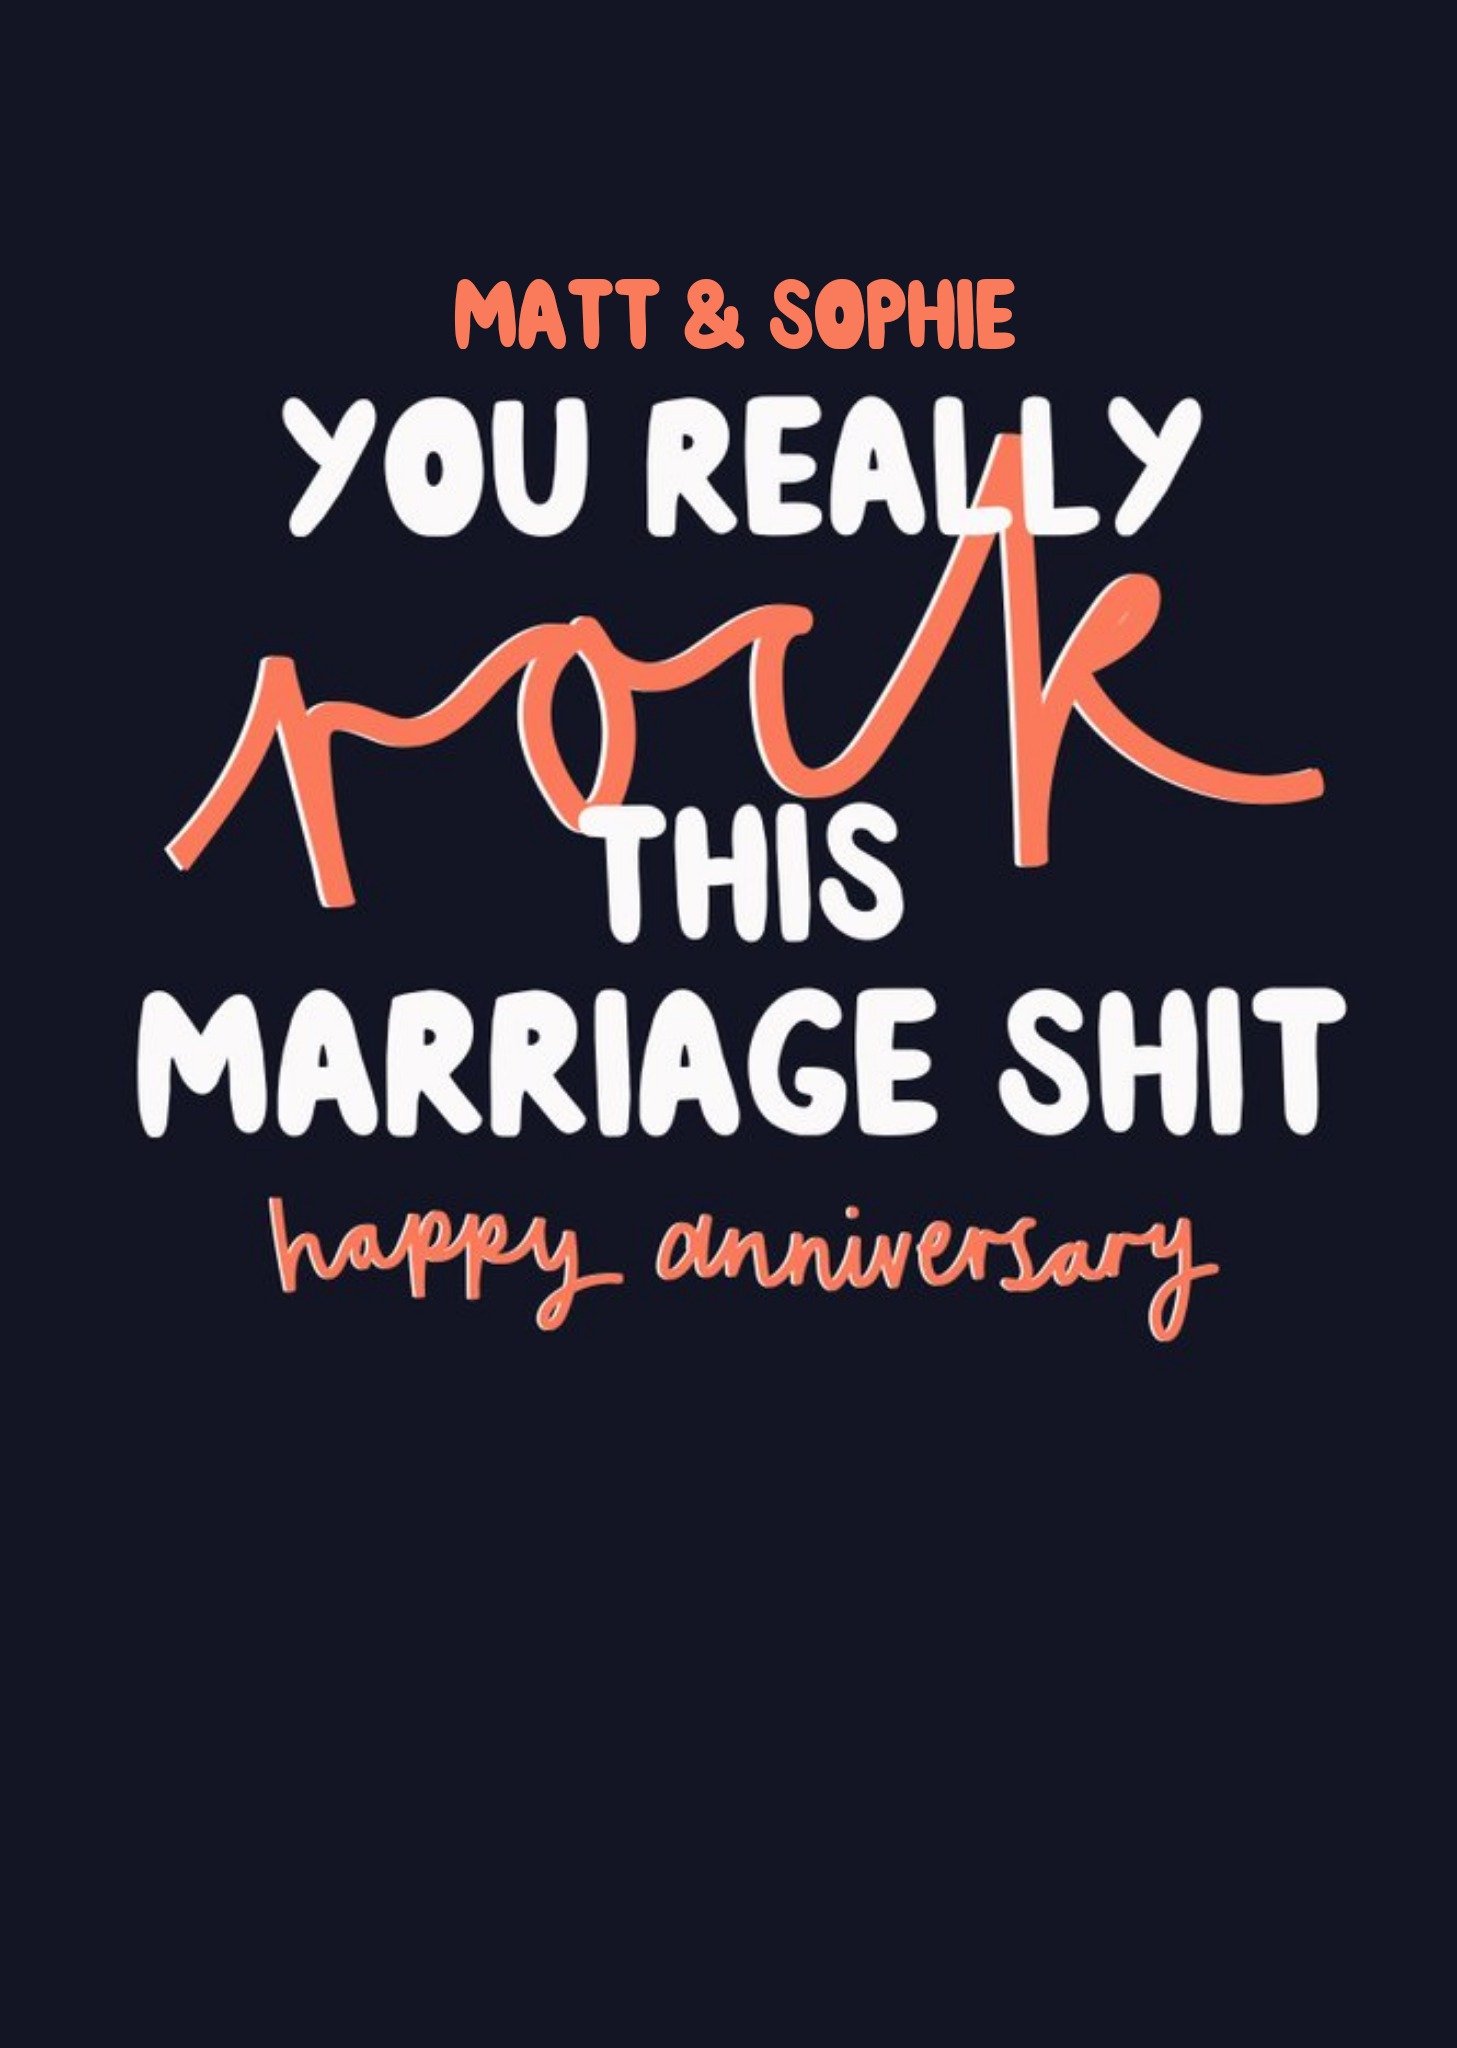 Moonpig You Really Rock This Marriage Shit Funny Anniversary Card, Large